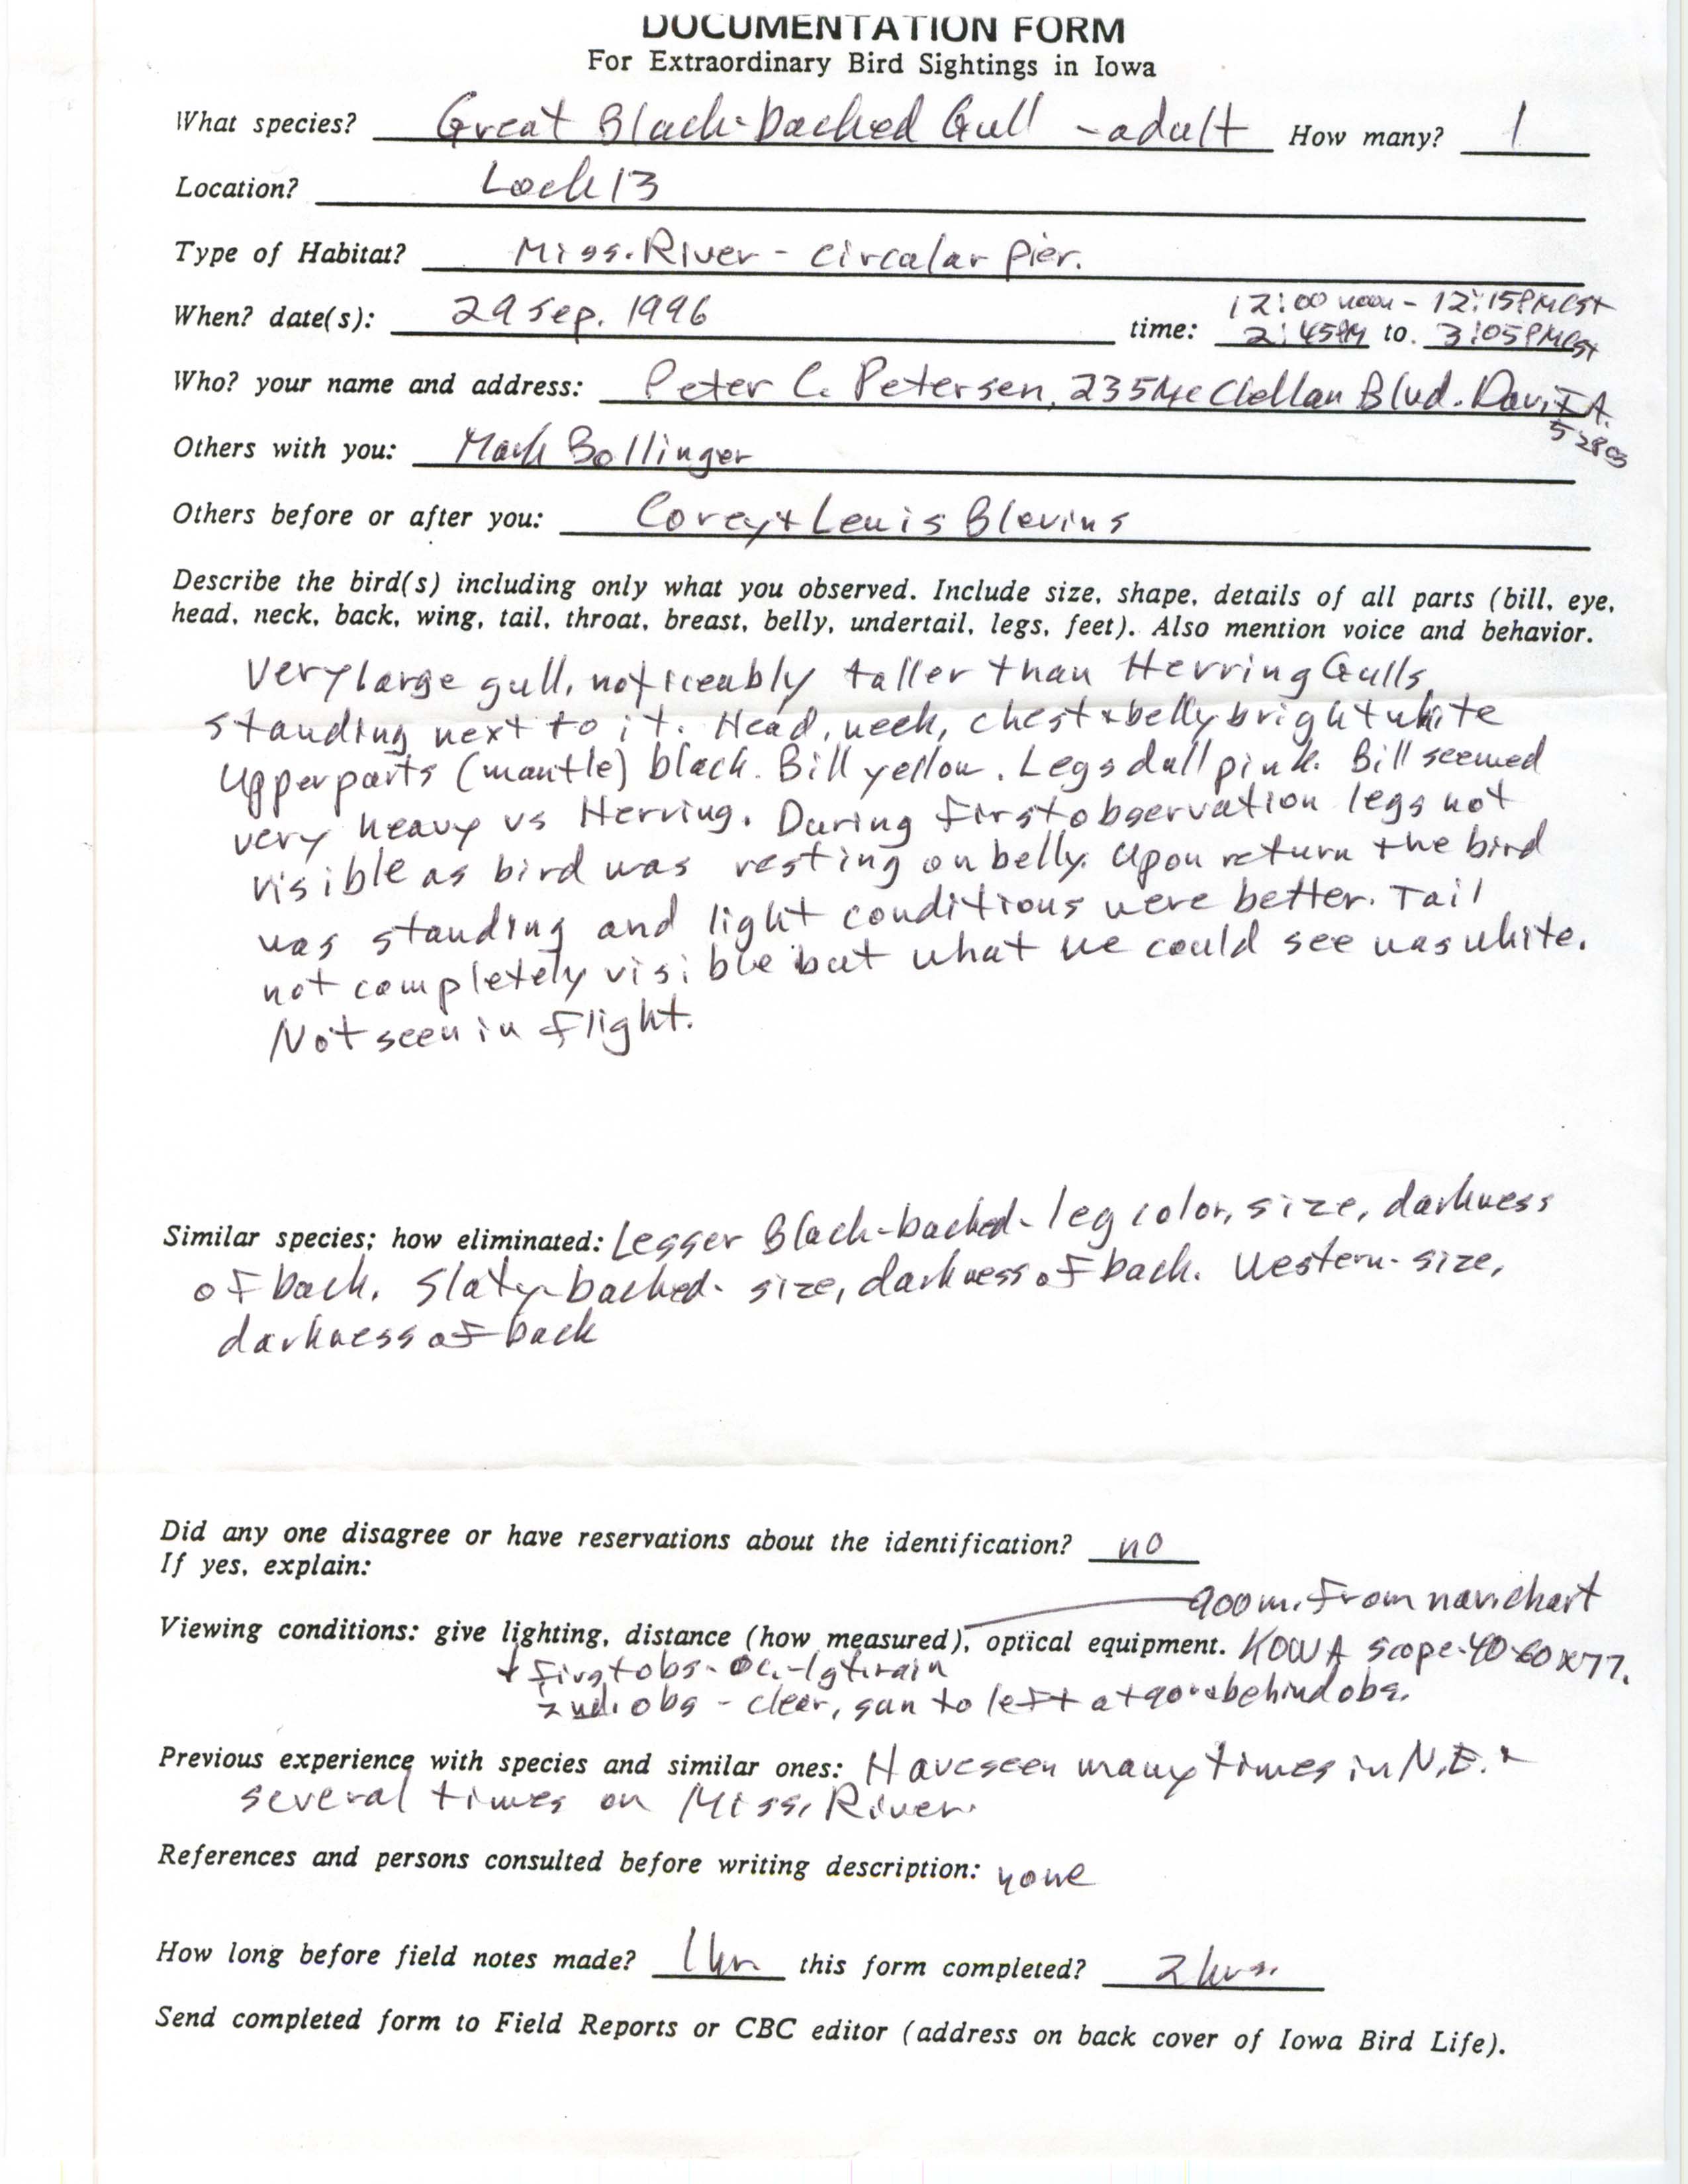 Rare bird documentation form for Great Black-backed Gull at Lock and Dam 13, 1996